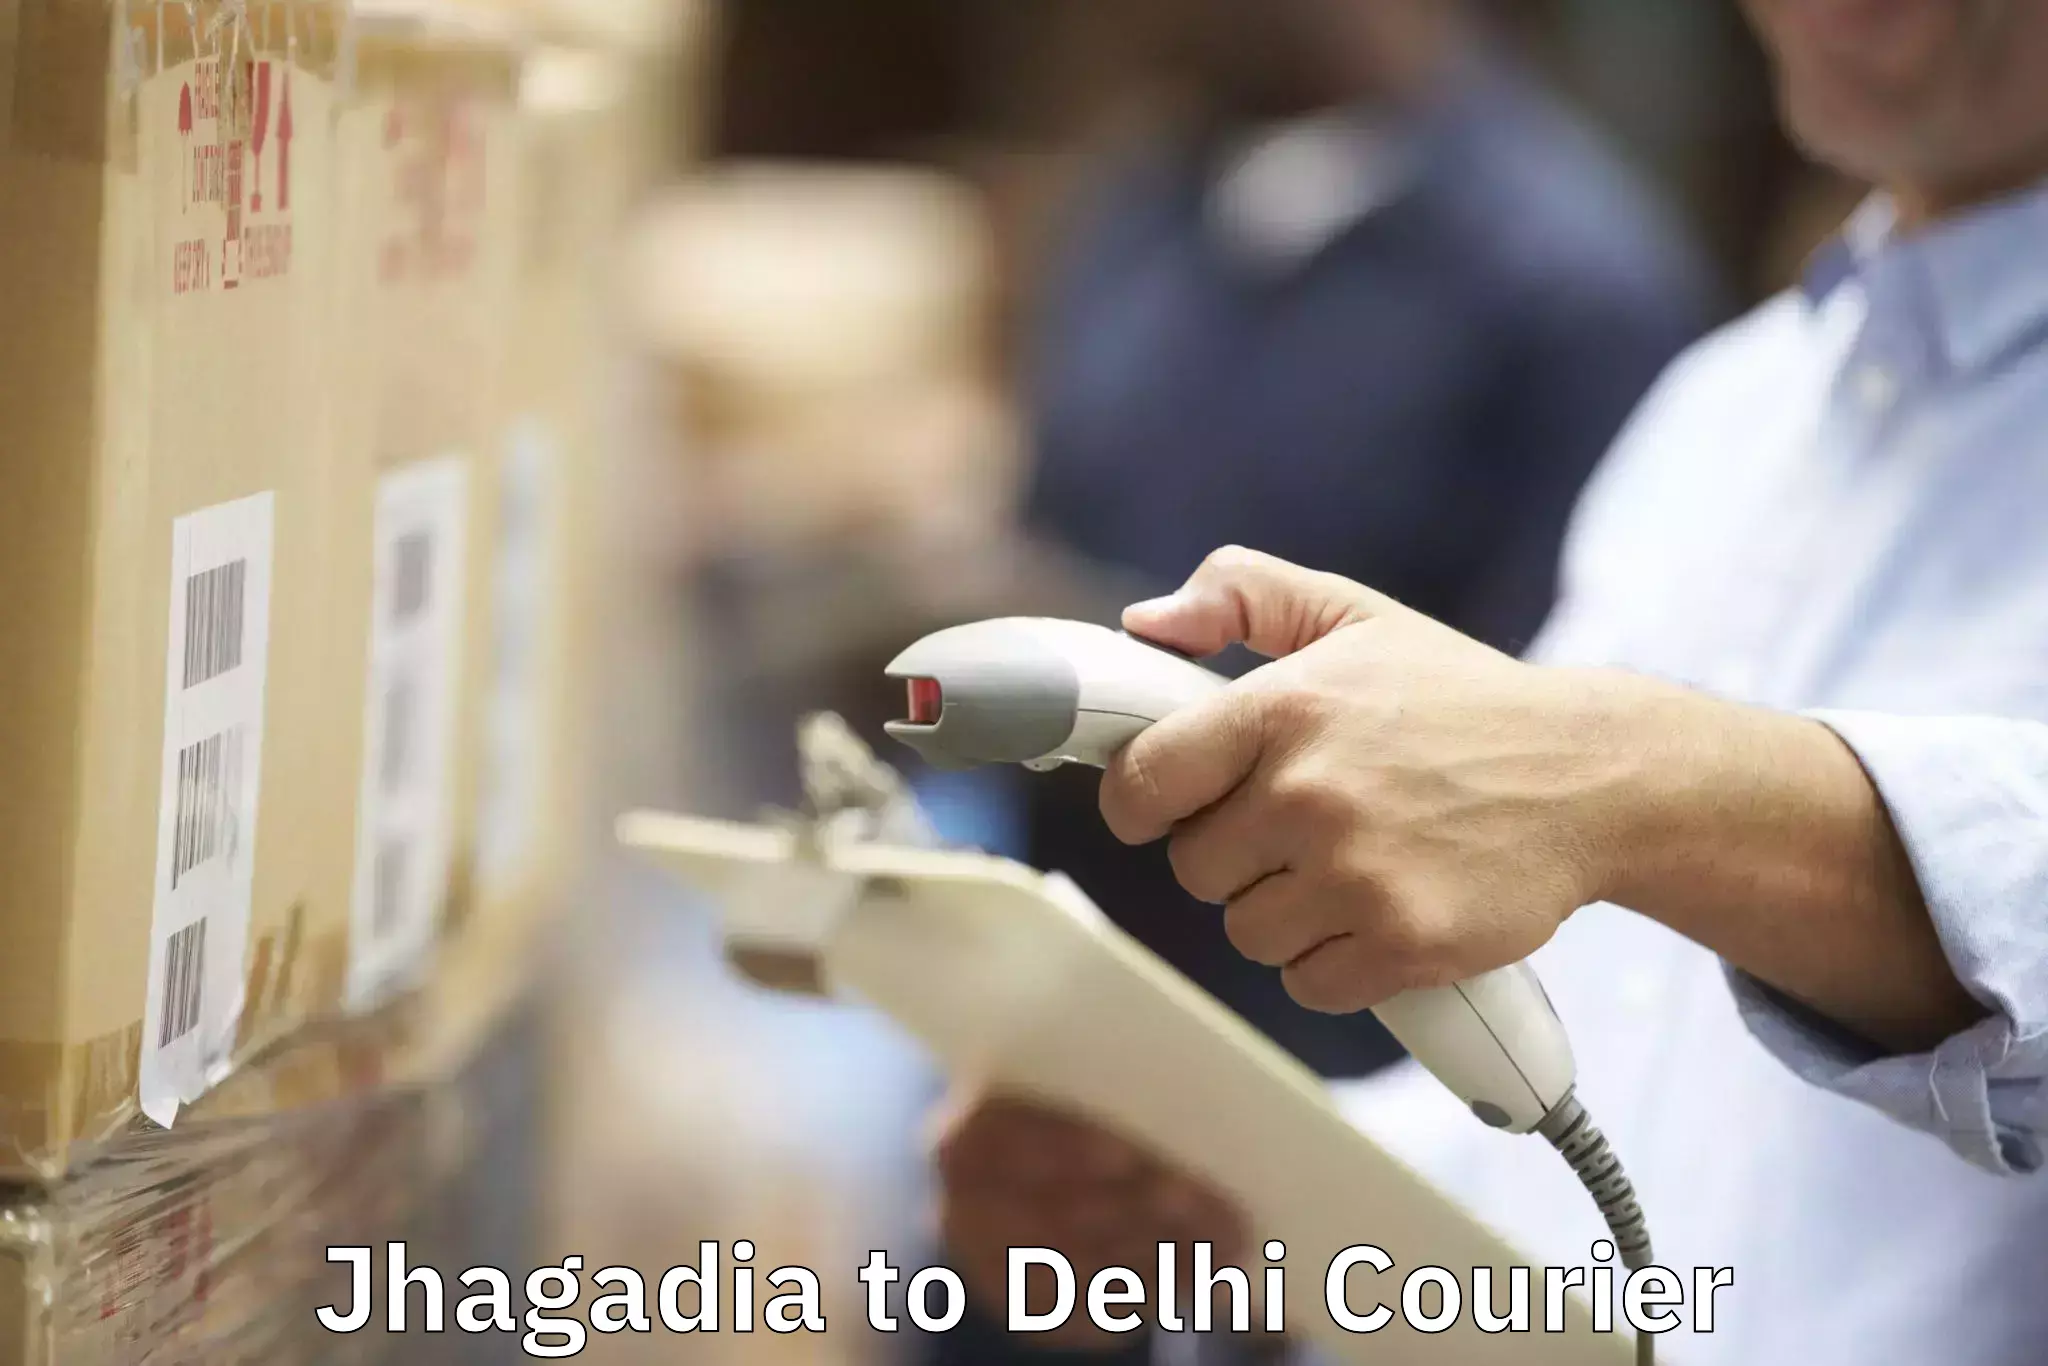 Furniture moving assistance Jhagadia to Lodhi Road